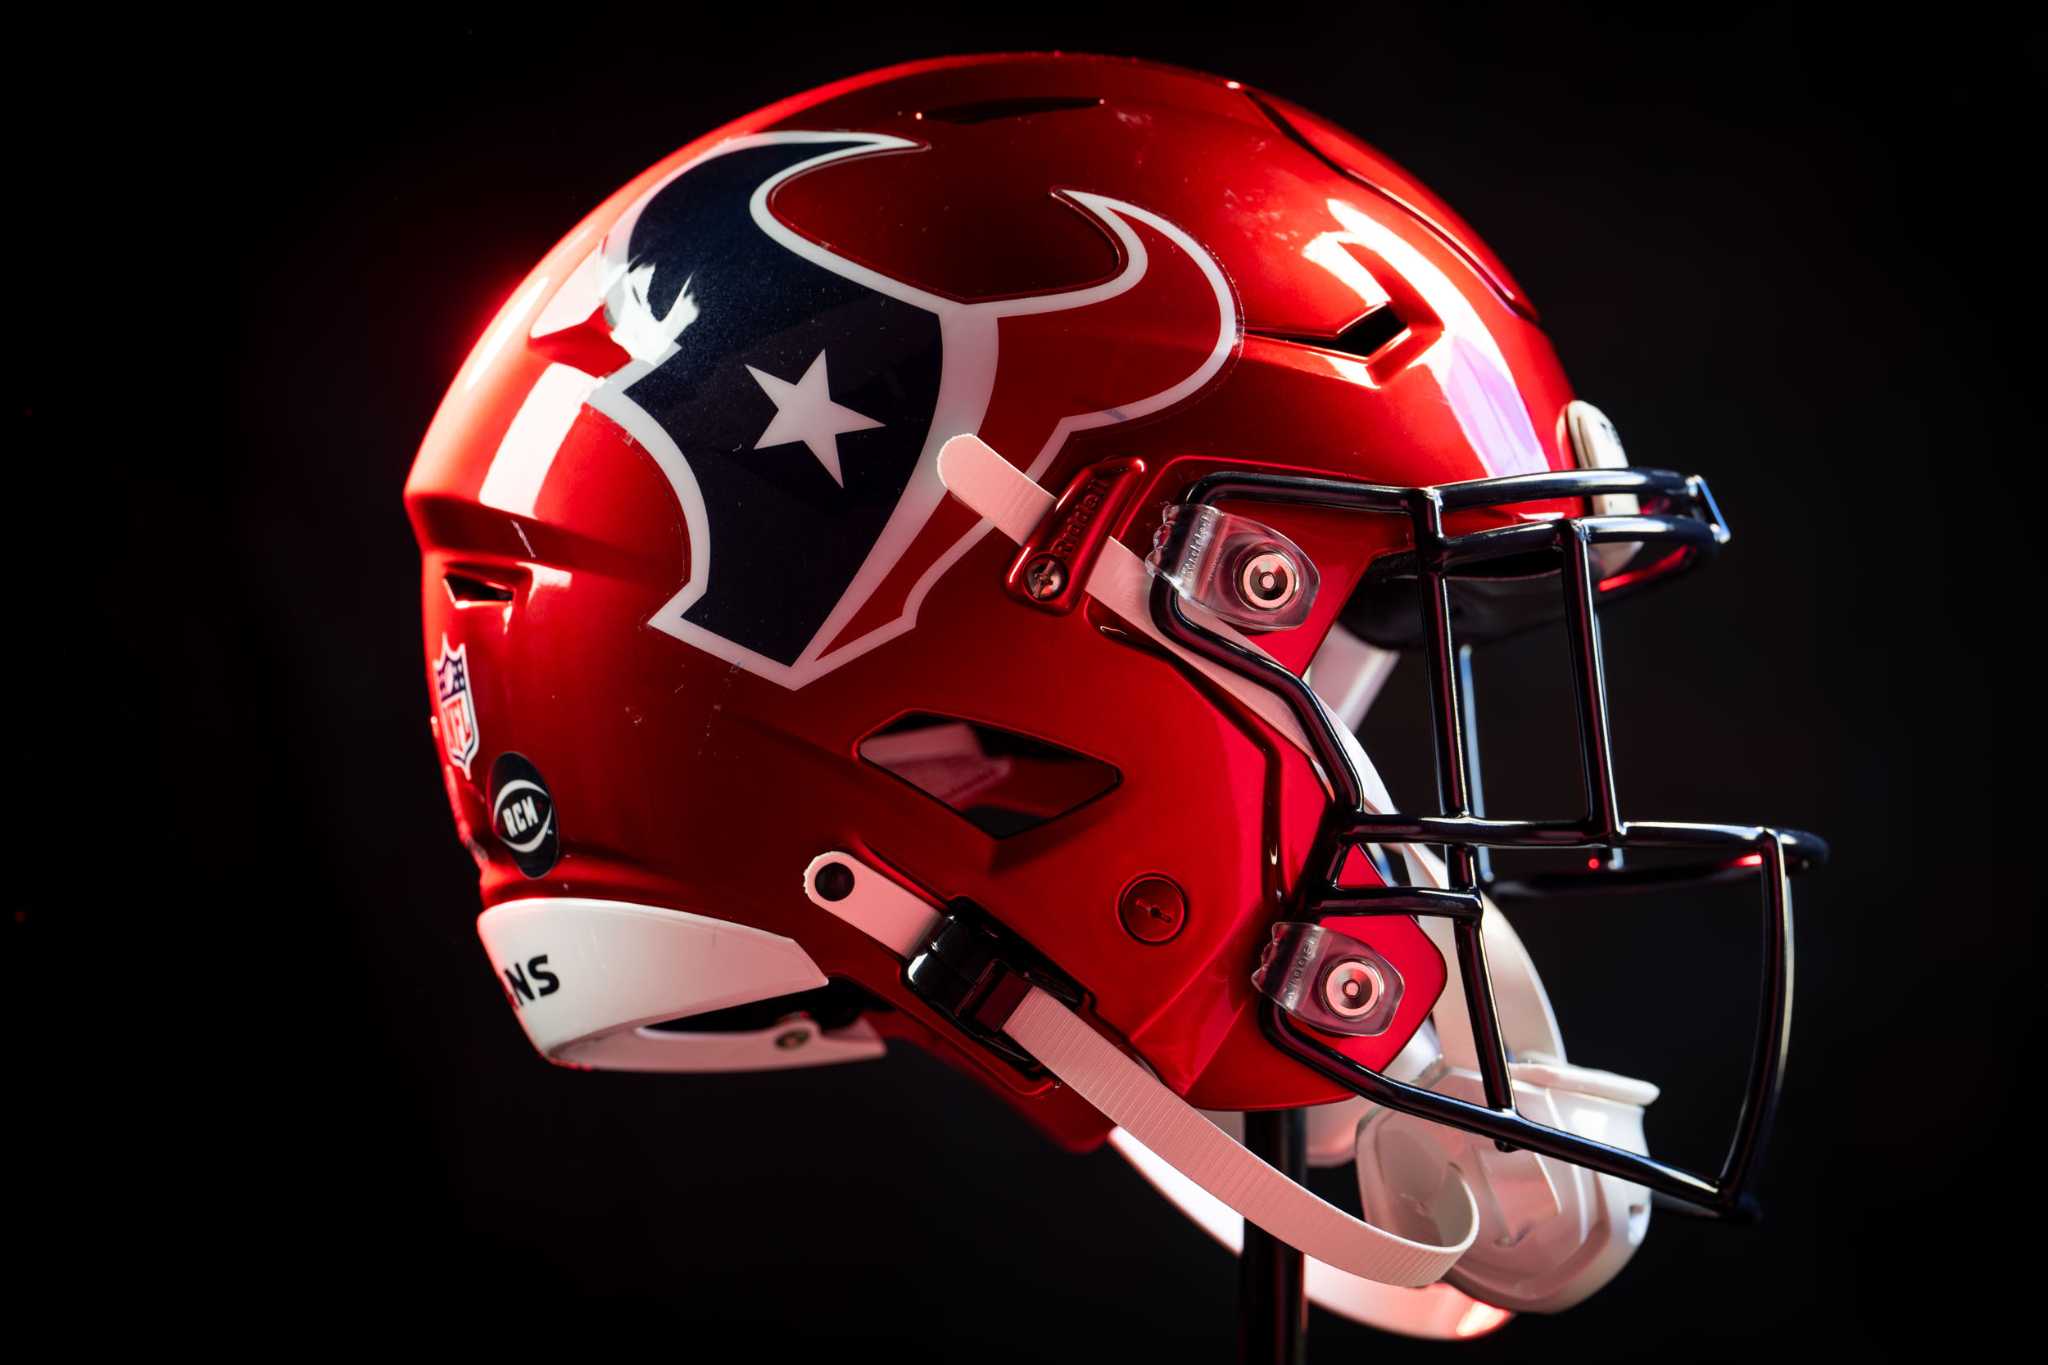 Houston Texans: Franchise could use a new brand